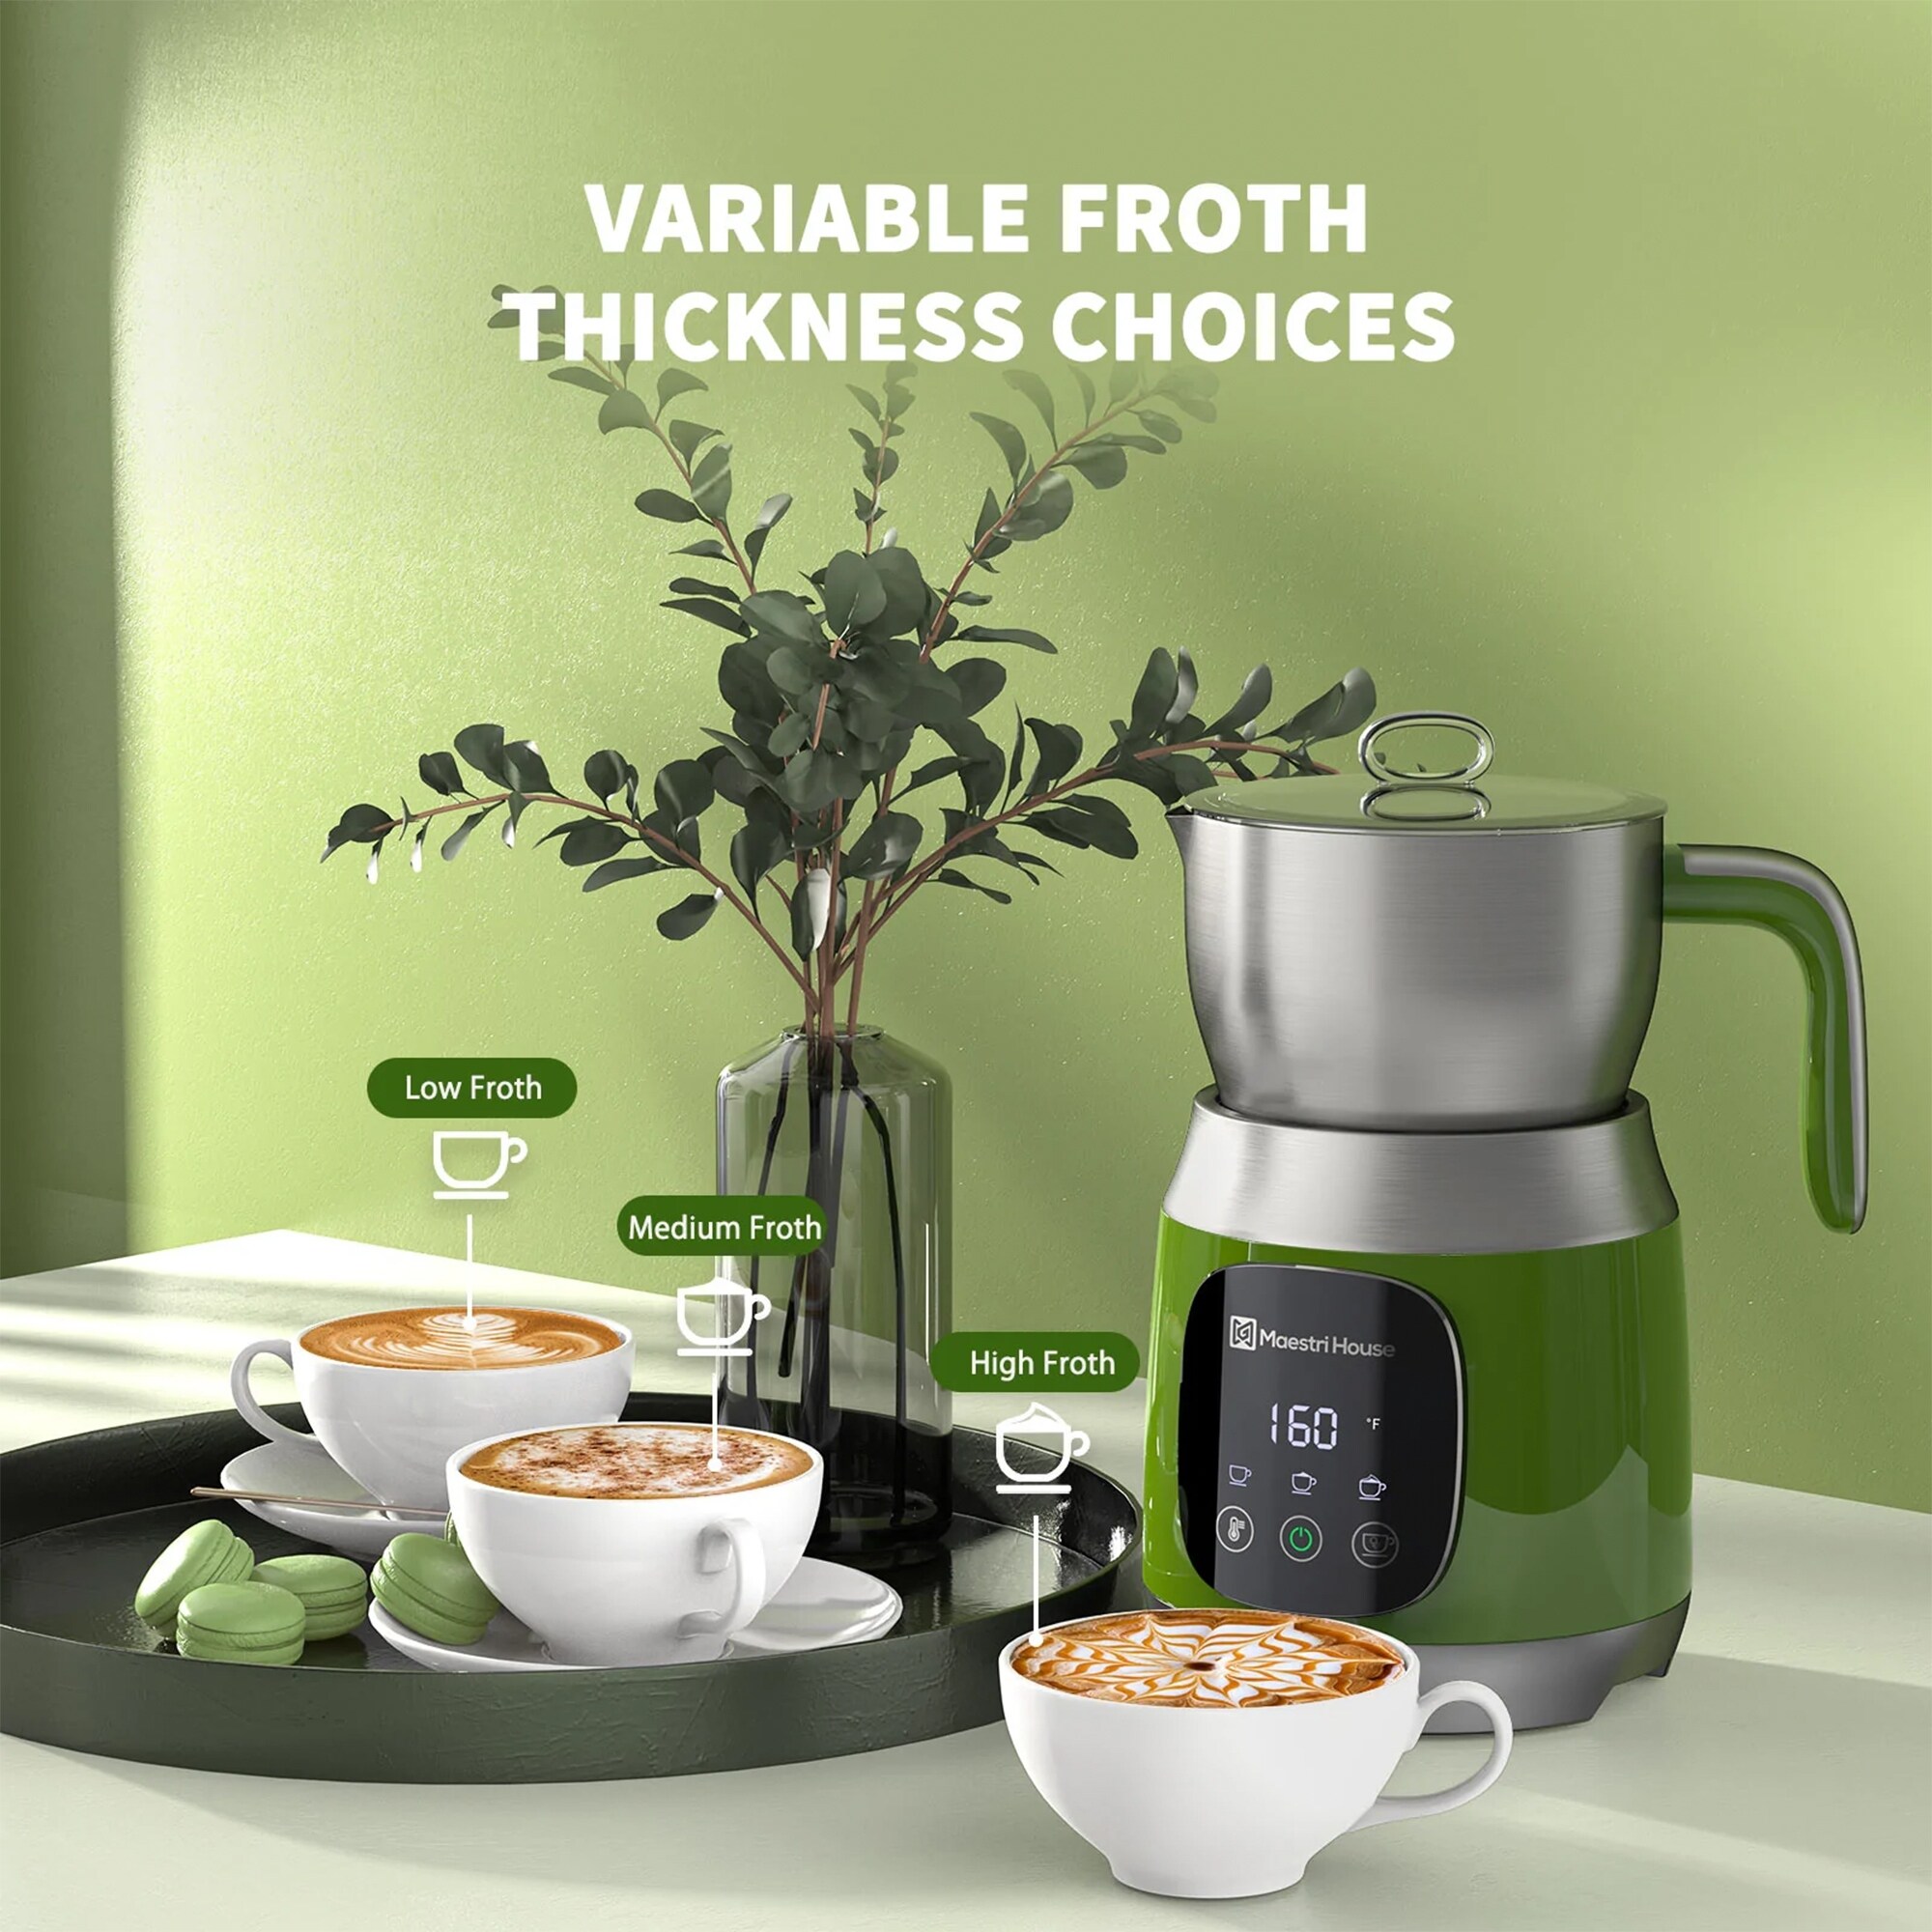 Maestri House 21 oz Detachable Smart Touch Digital Milk Frother Pot, Green